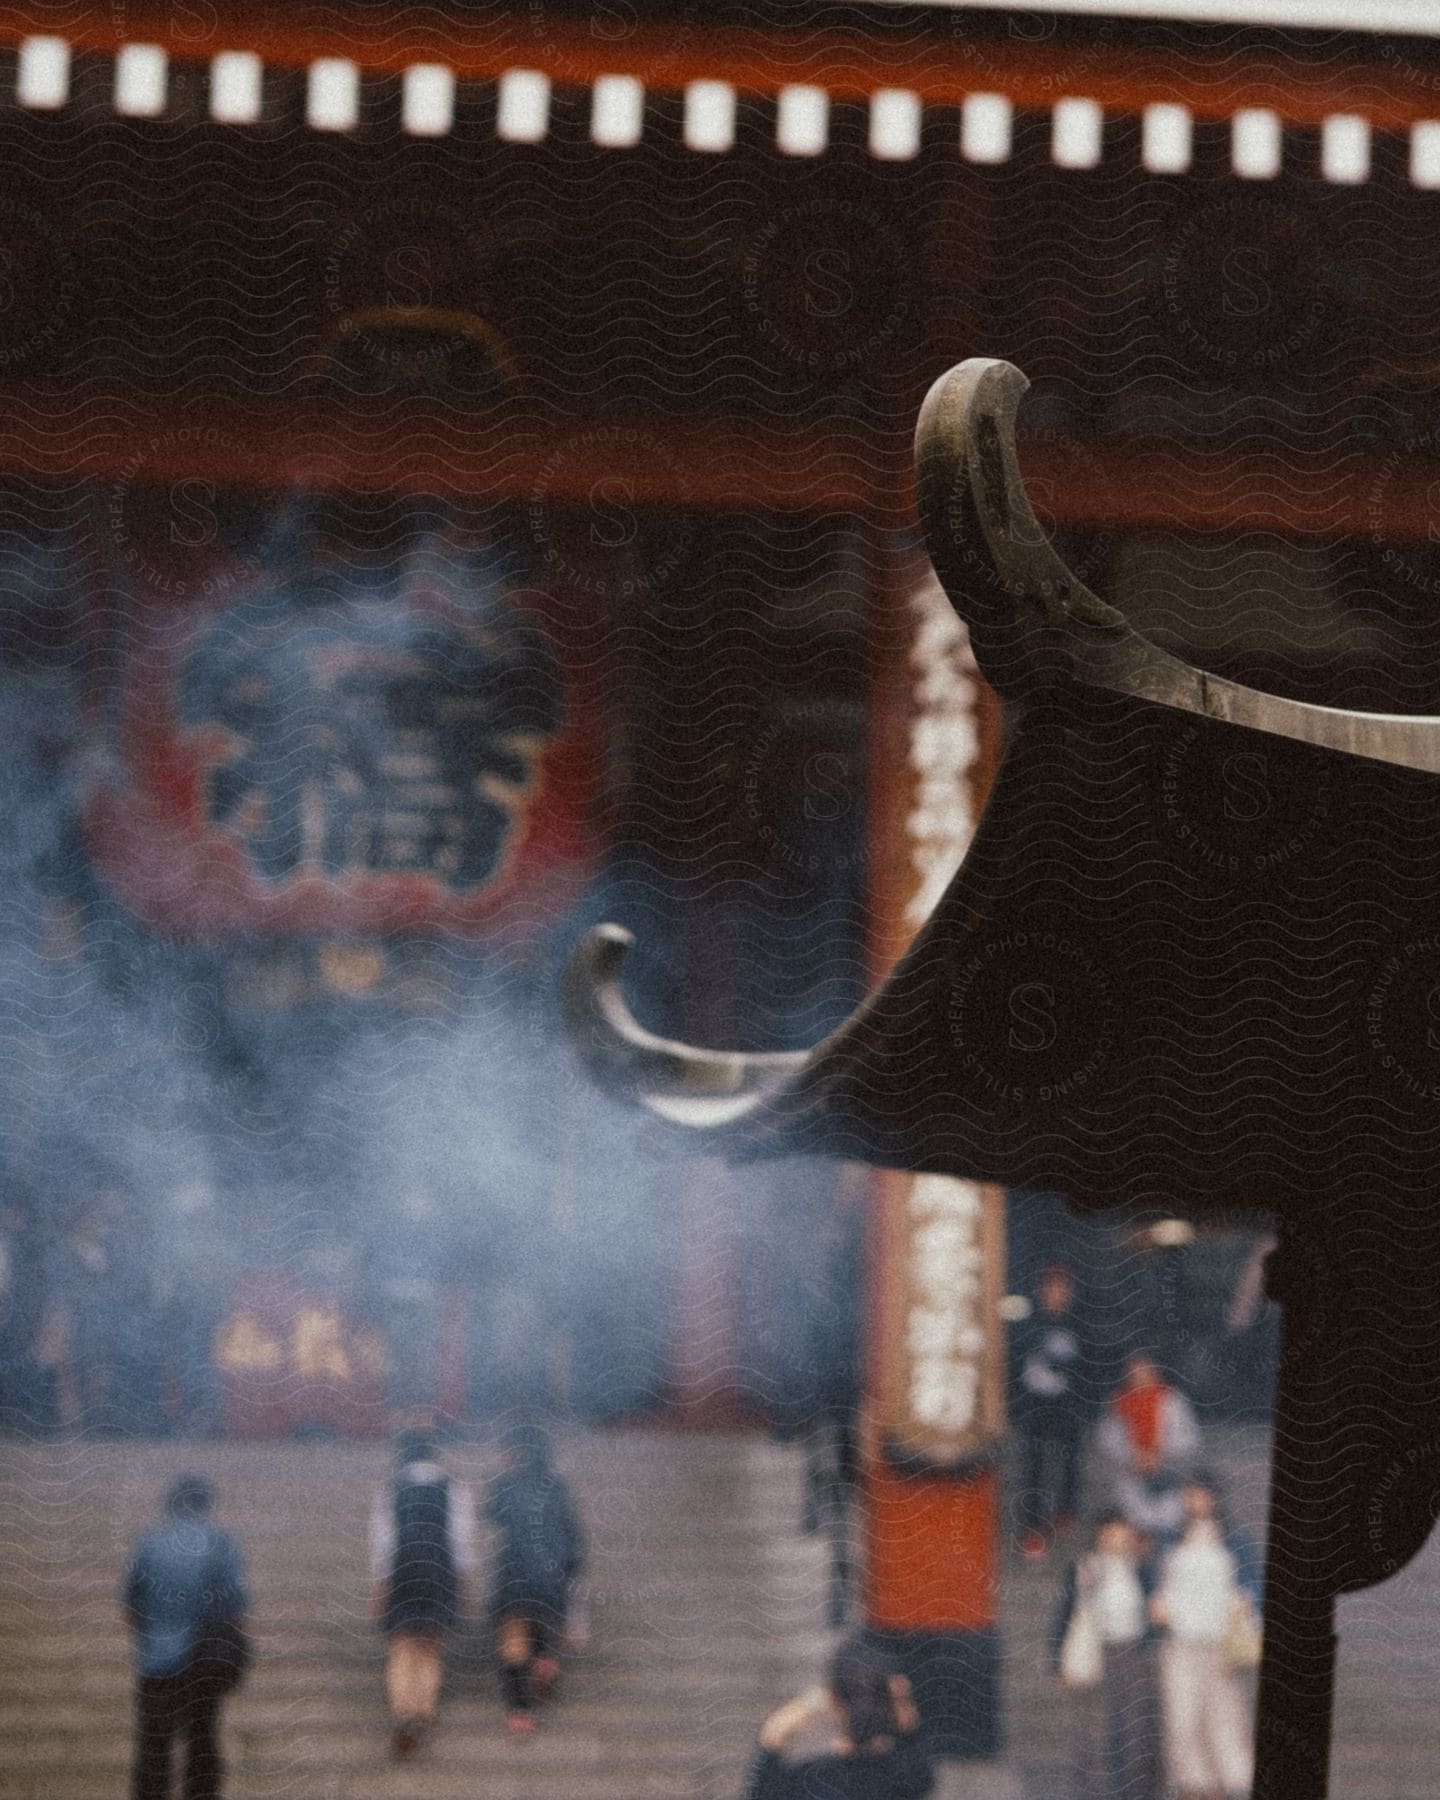 A large incense burner emits smoke in front of a traditional building, while people circulate around it. The atmosphere is serene and spiritual, with the incense and the architectural style of the building contributing to this feeling.